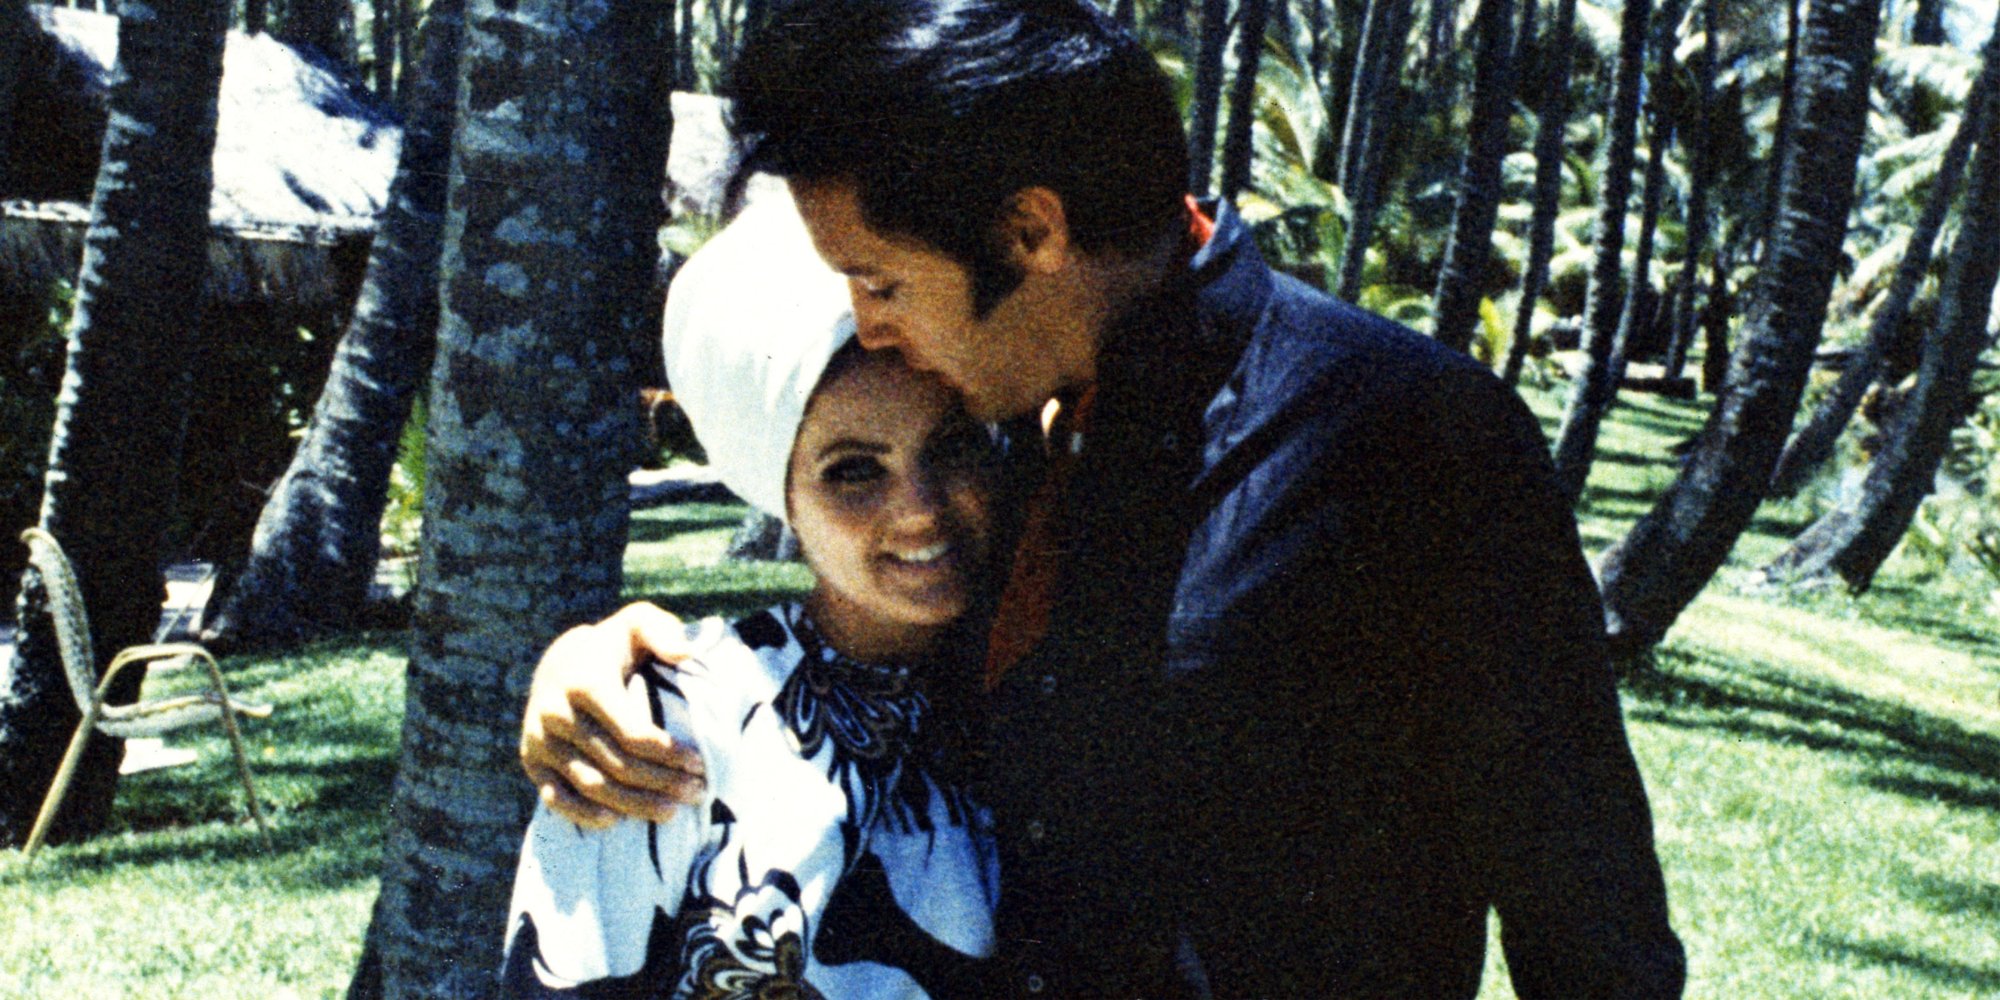 Priscilla and Elvis Presley pose during their marriage in Los Angeles, California.